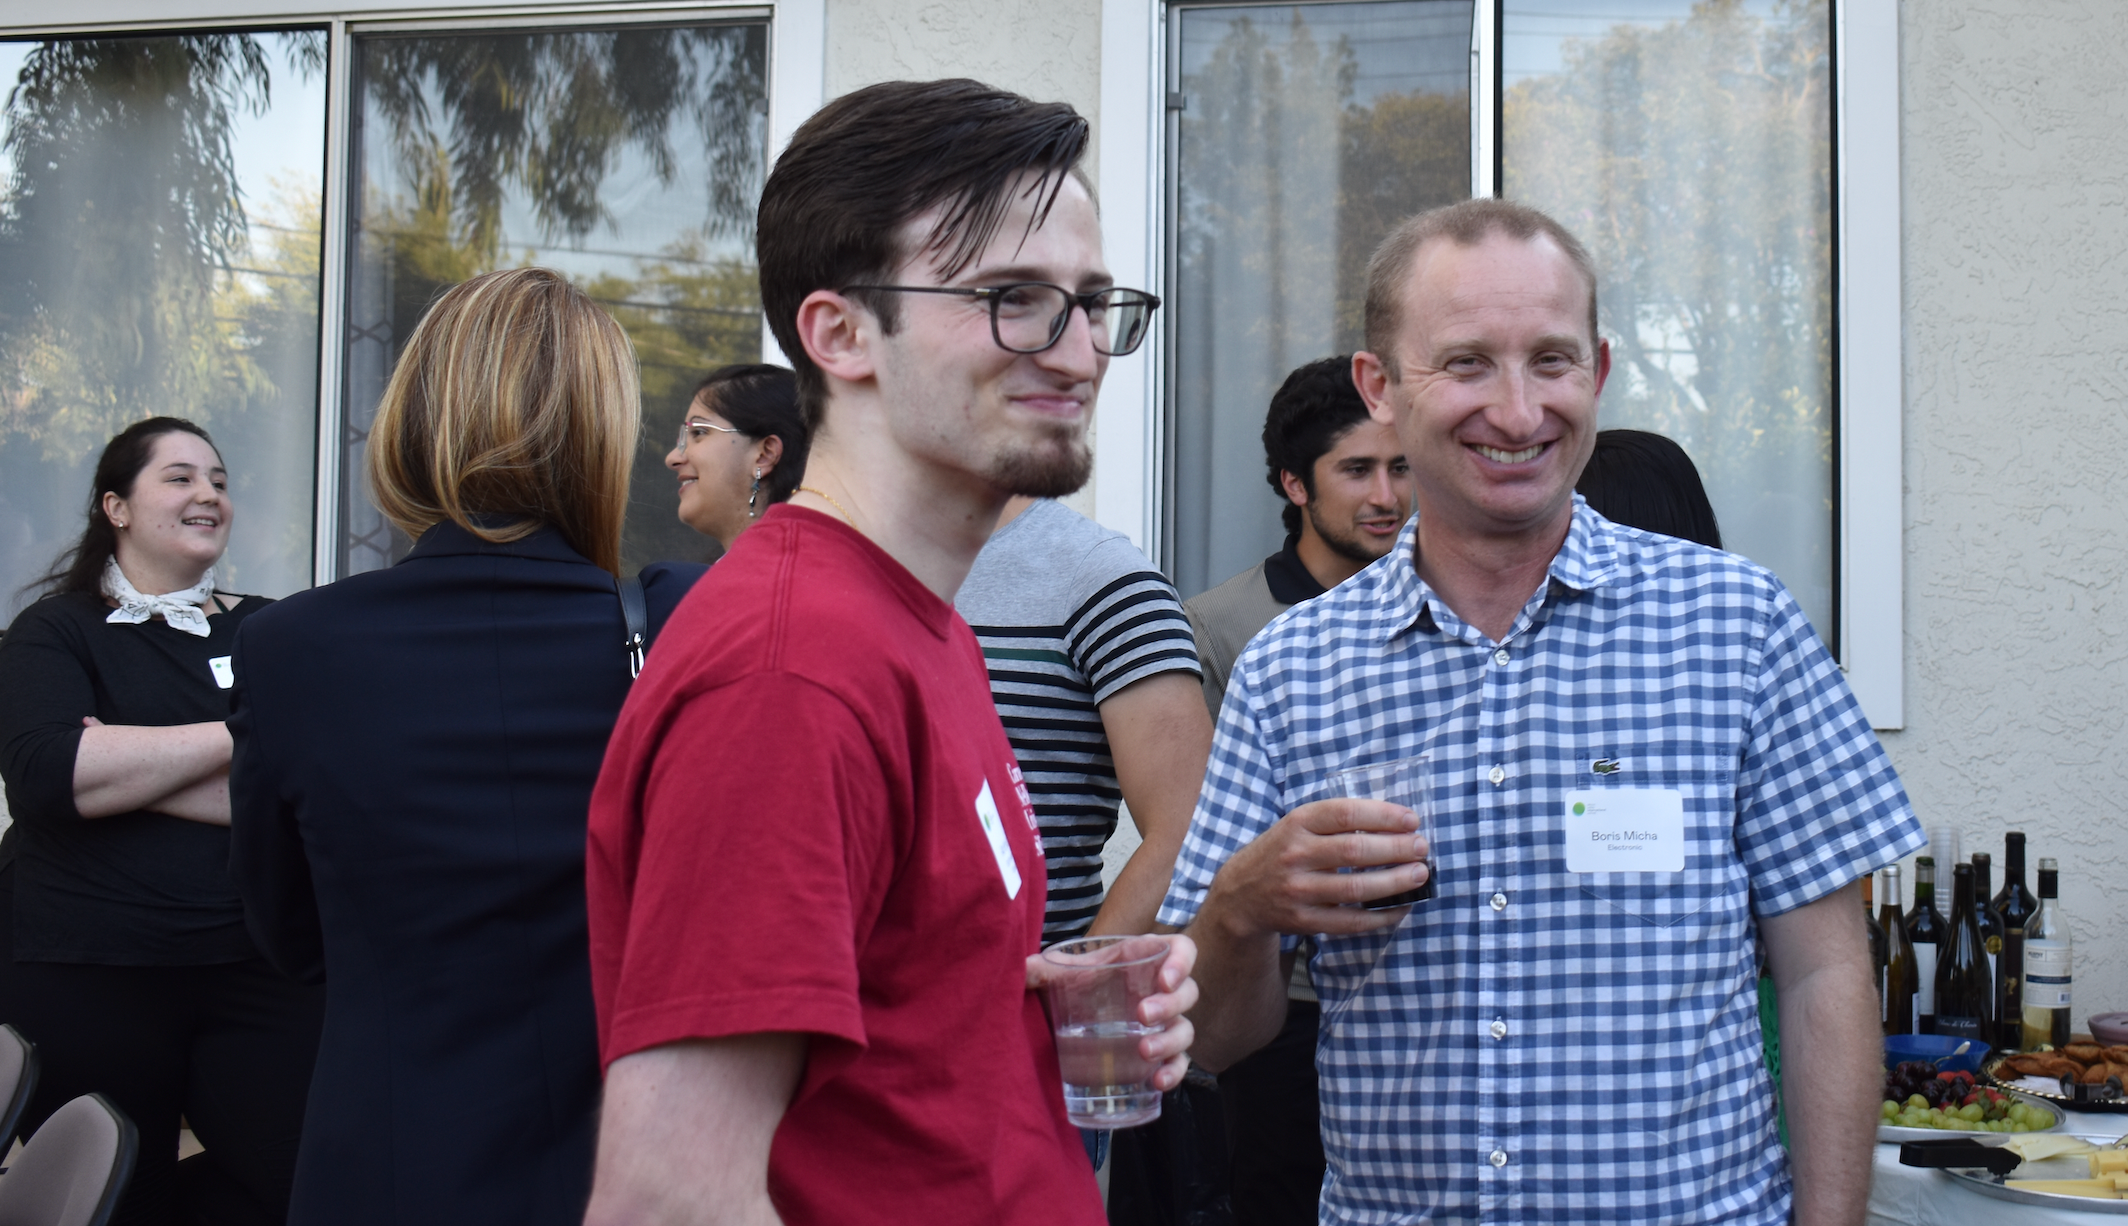 Arthur (left) and his father (right) at a recent alumni event at INTL.